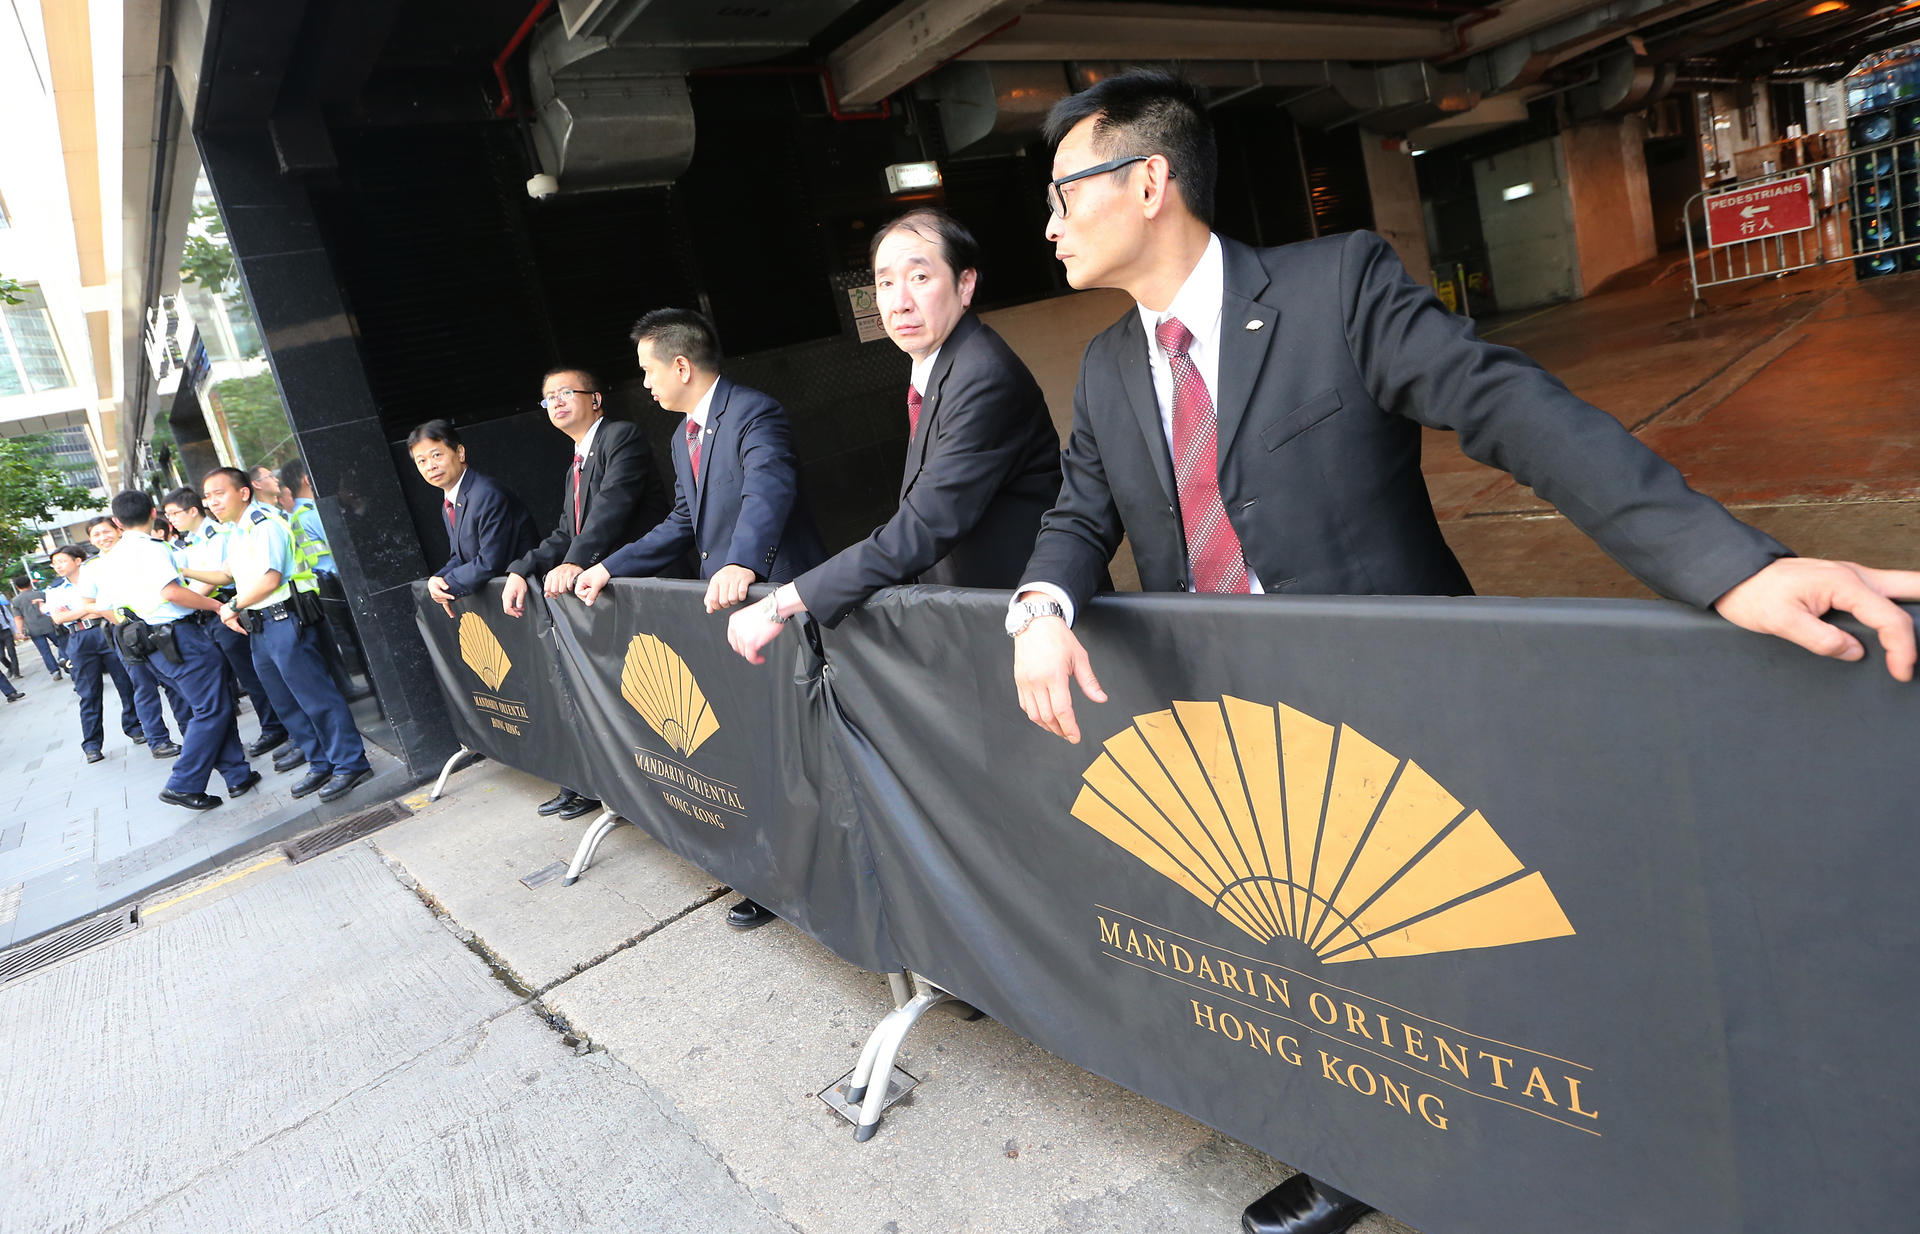 Hotel security guards and police officers keep watch outside the Mandarin Oriental. Photo: David Wong